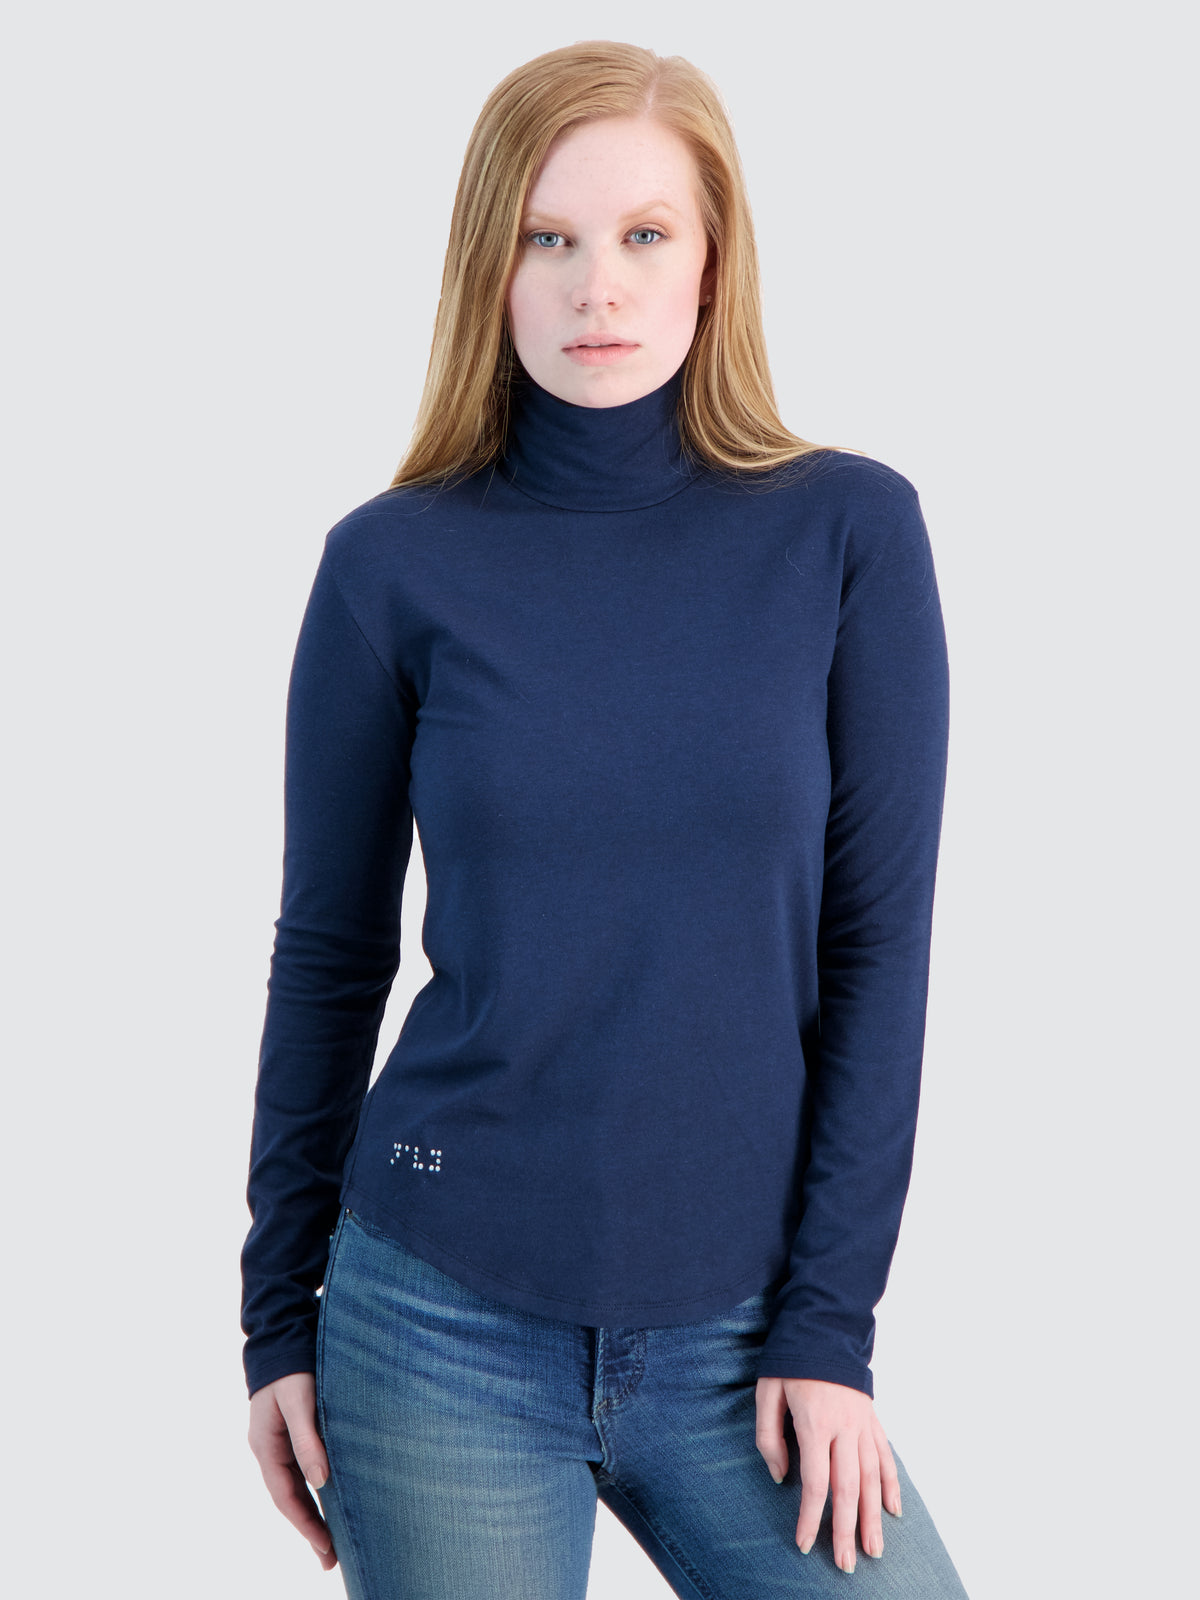 Two Blind Brothers - Womens Women's Turtleneck Maroon